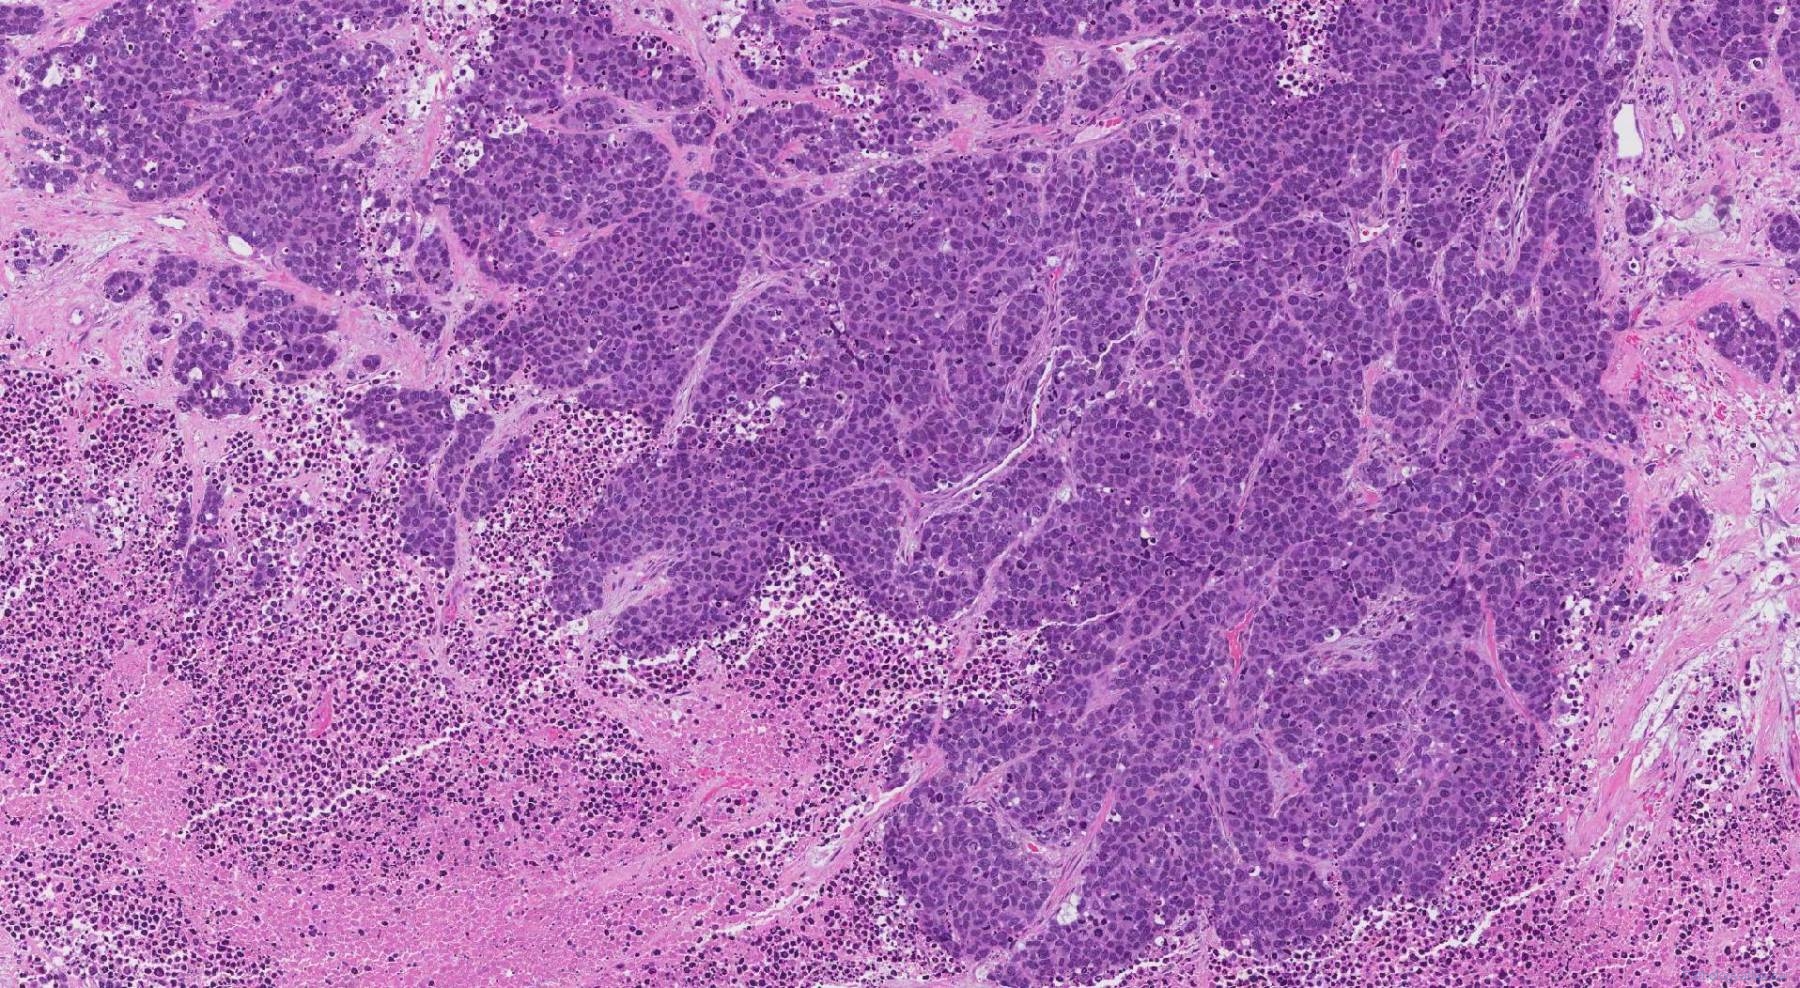 Large Cell Neuroendocrine Carcinoma Of The Lung Atlas Of Pathology